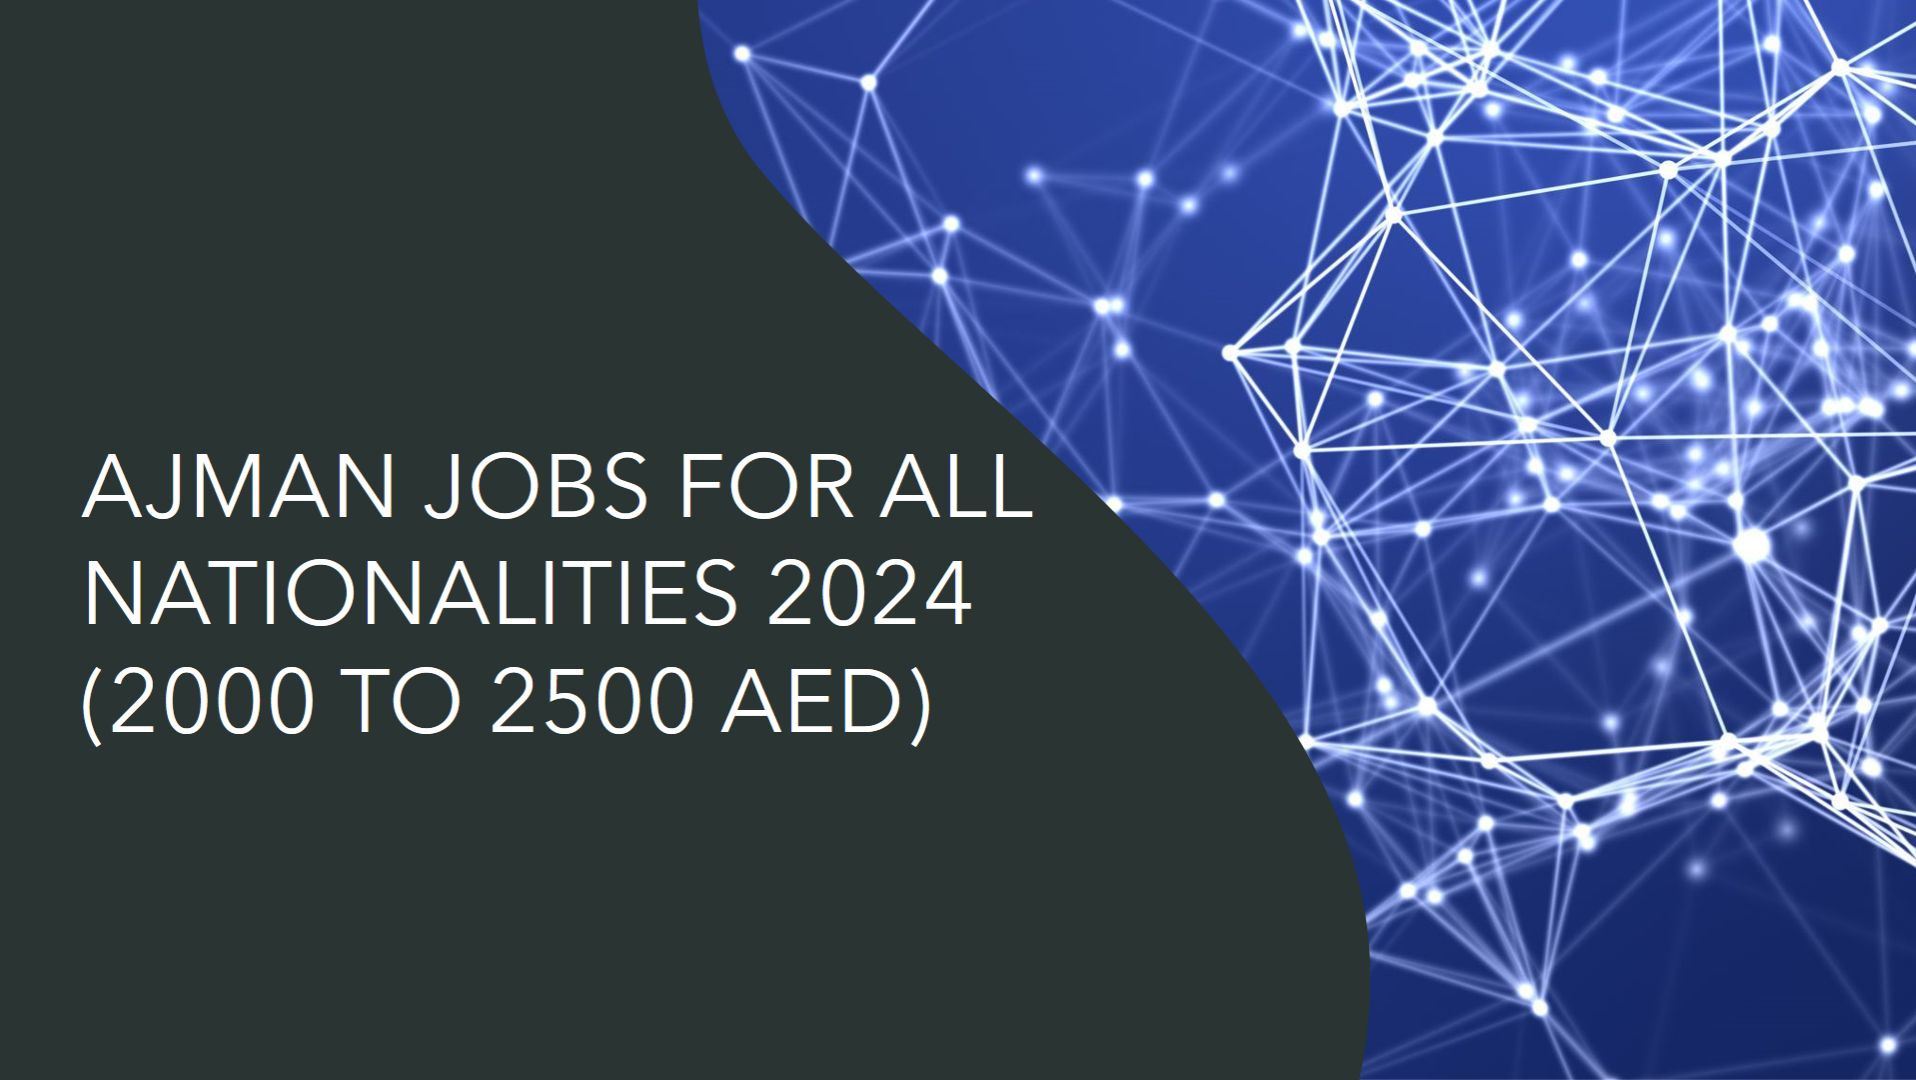 ajman jobs for all nationalities 2024 (2000 to 2500 AED)